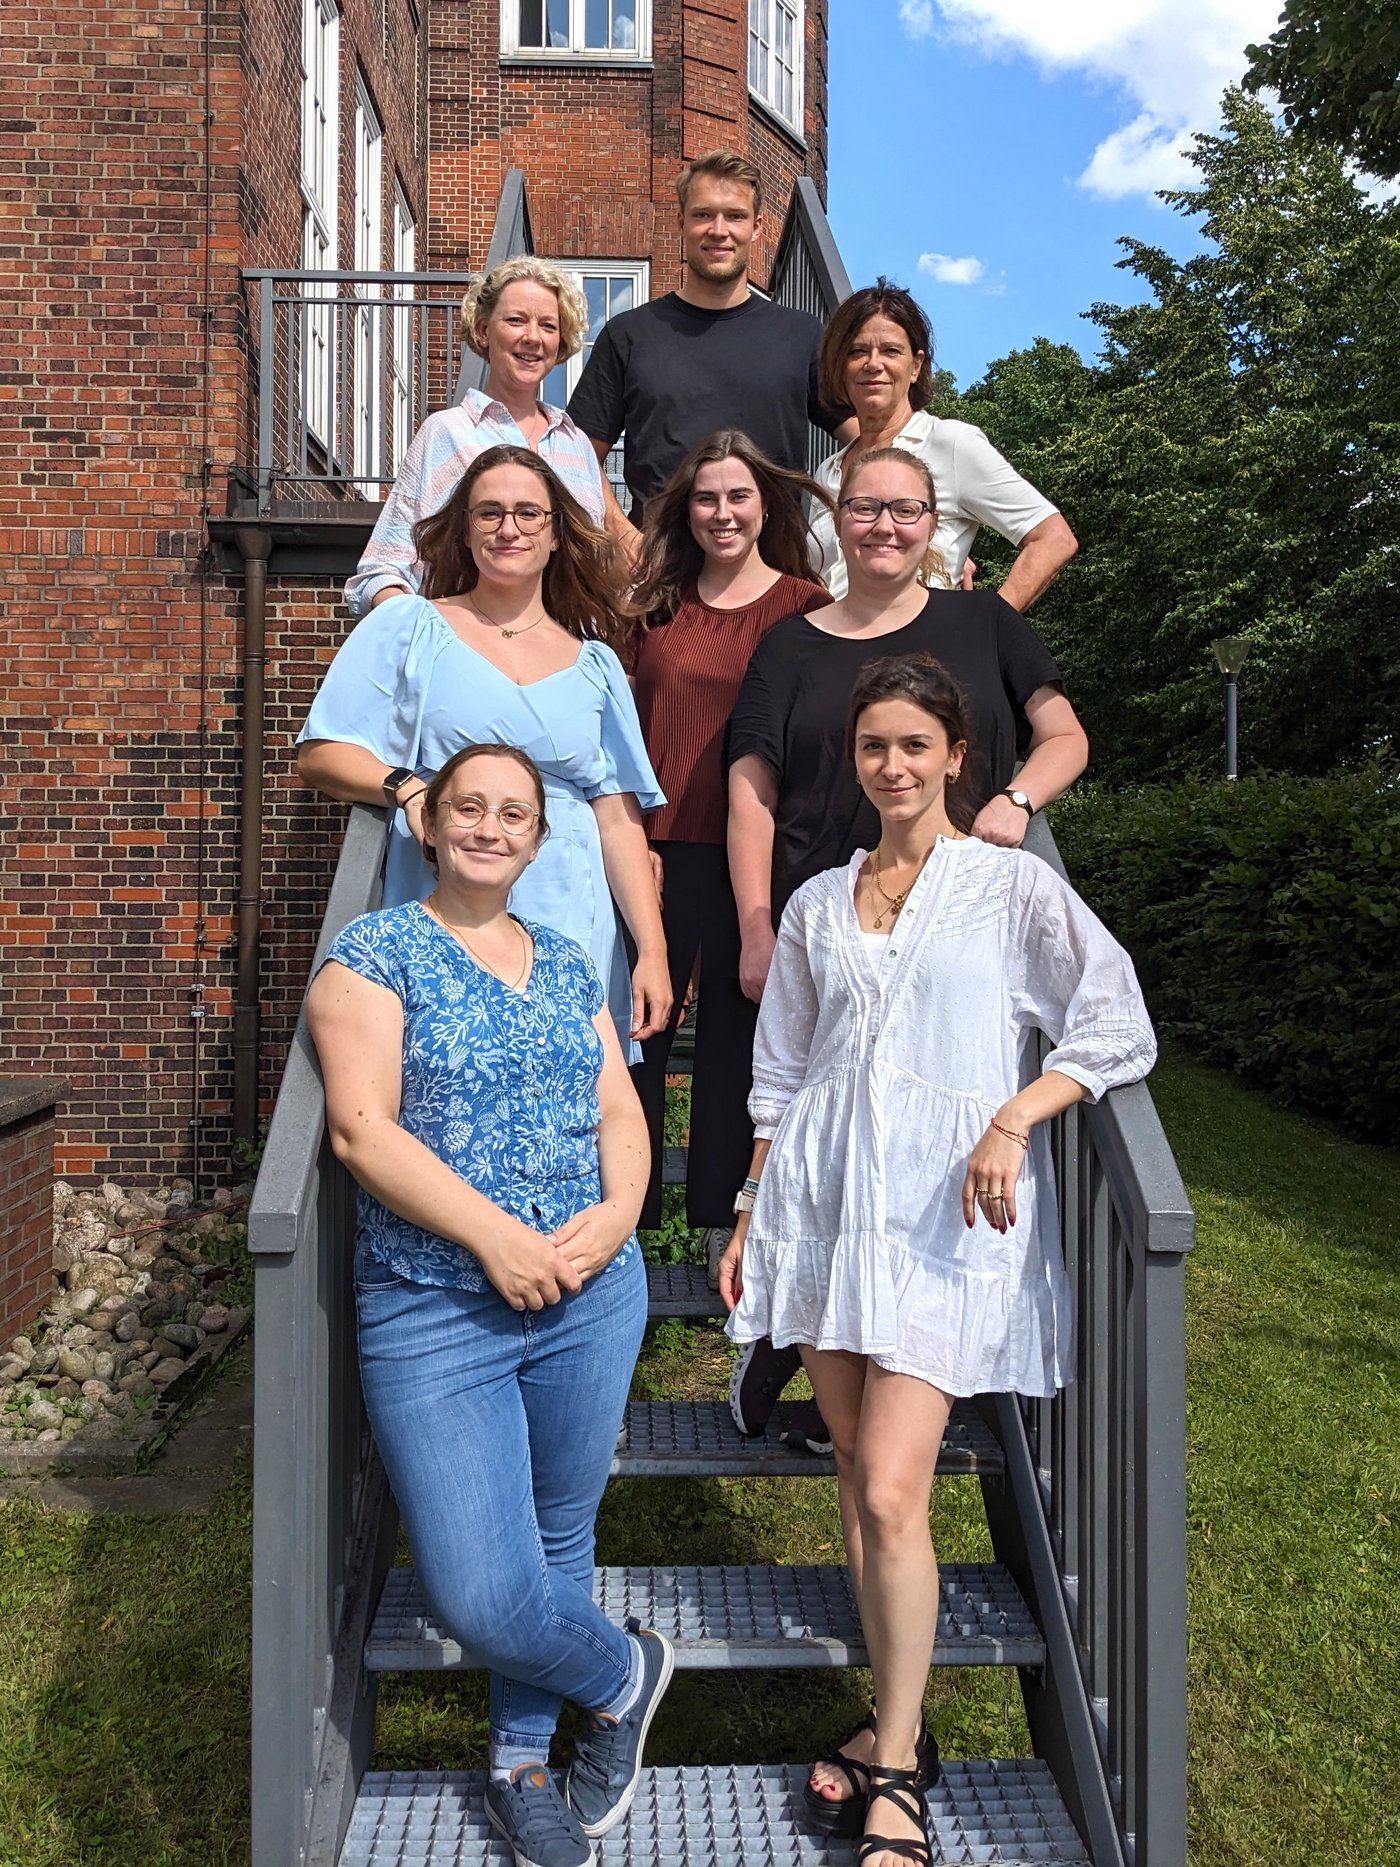 The research group with 8 members ist standig on a scale in the garden of the bernhard-Nocht-Institut. it´s quiet summery.